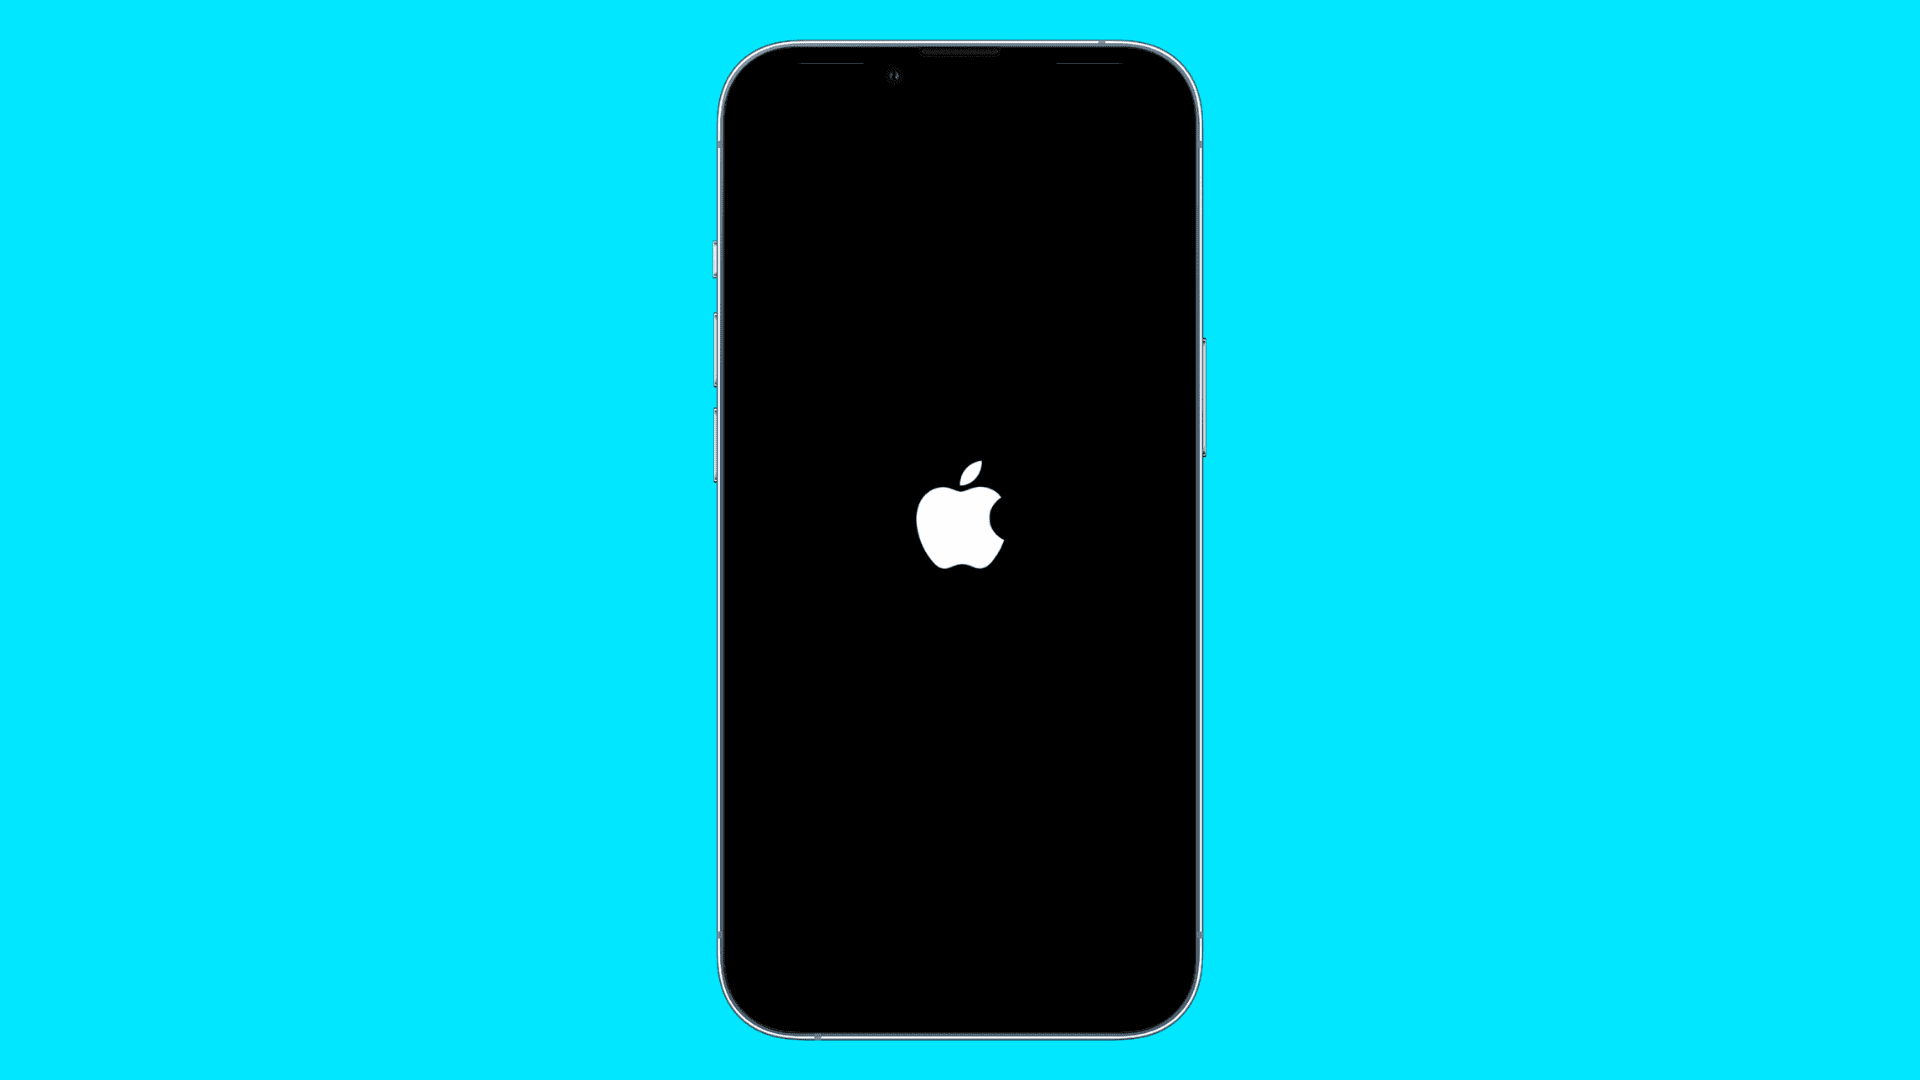 iPhone reboot screen showing the white Apple logo on black background